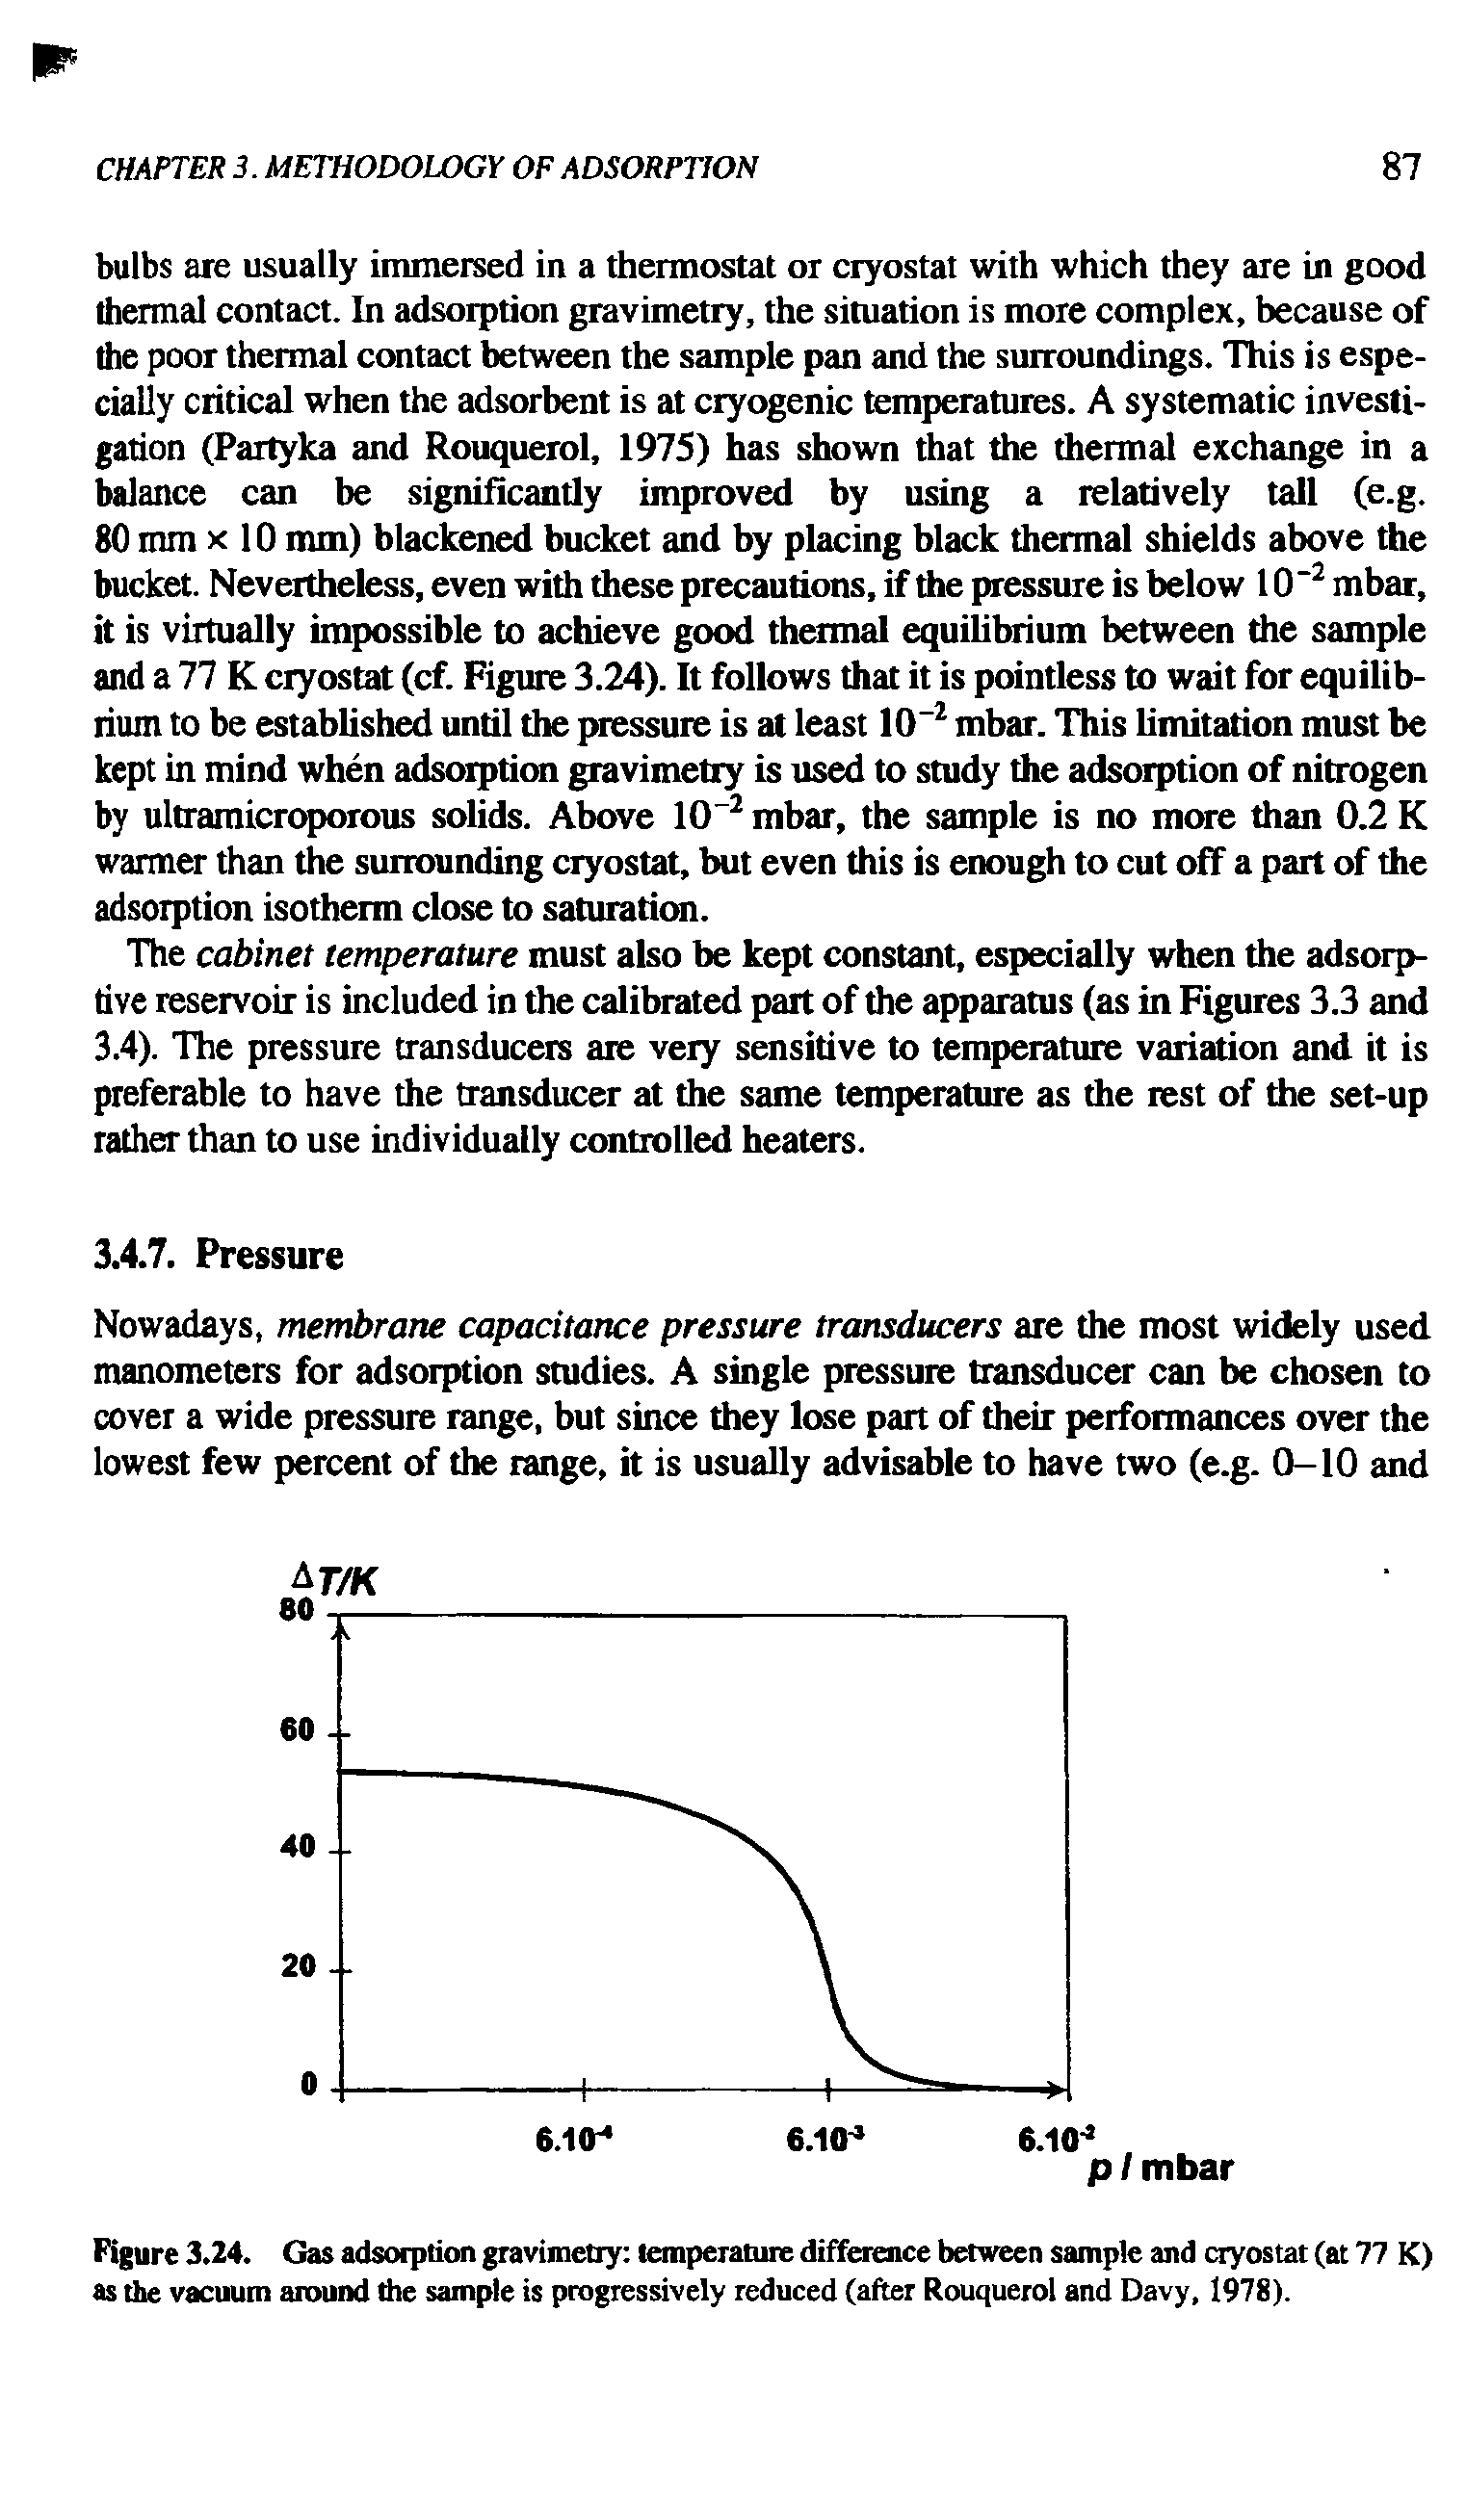 Figure 3.24. Gas adsorption gravimetry temperature difference between sample and cryostat (at 77 K) as the vacuum around the sample is progressively reduced (after Rouquerol and Davy, 1978).